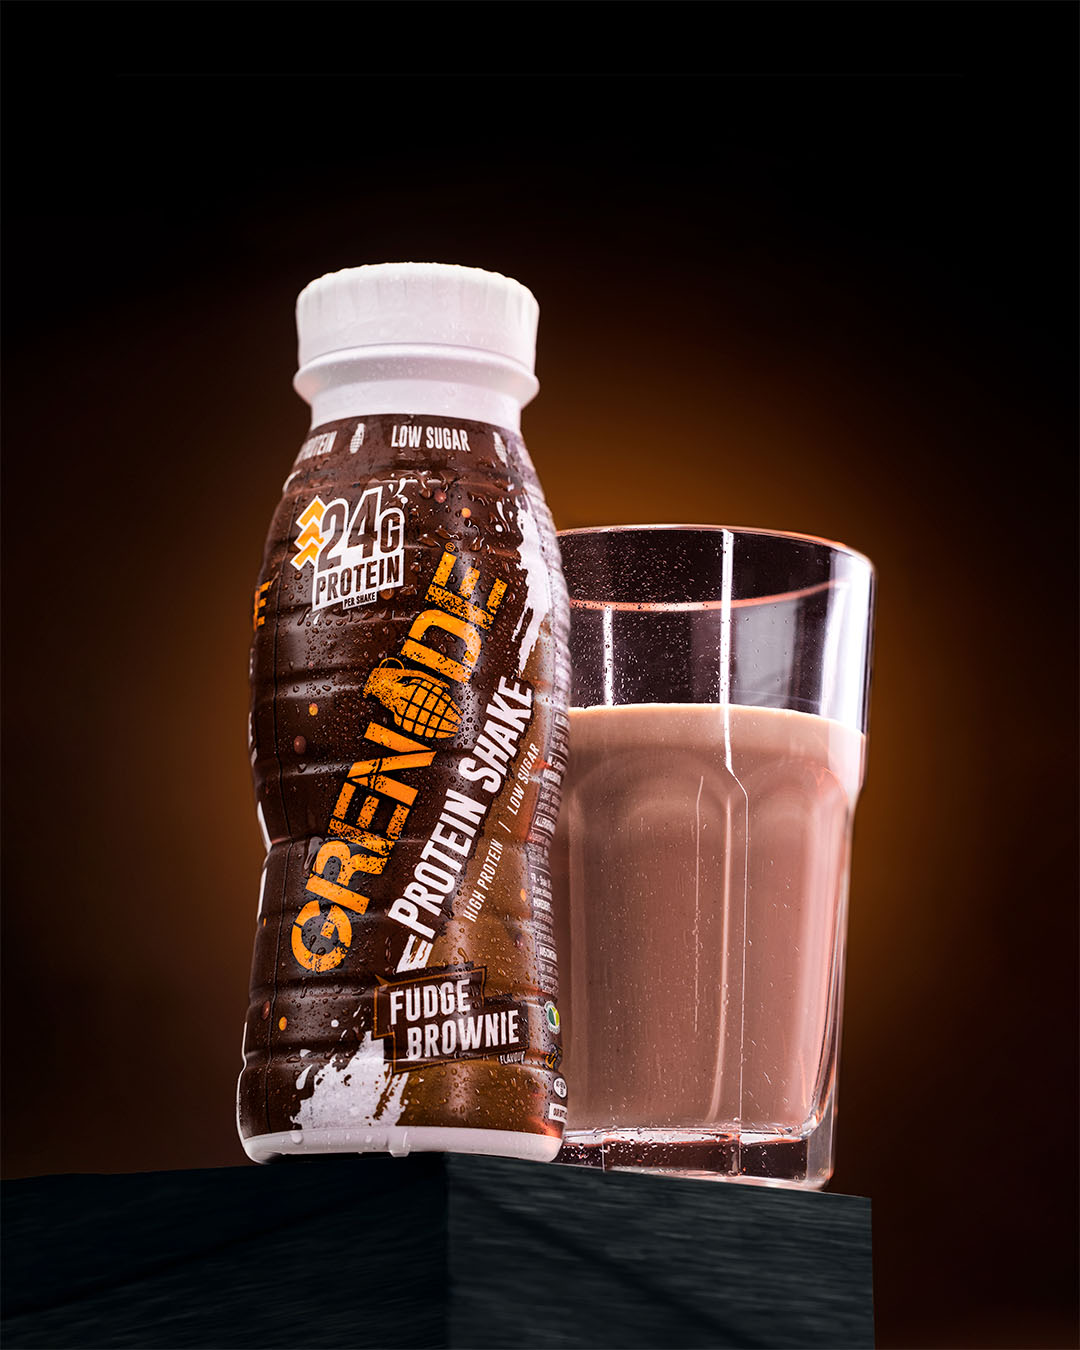 Grenade Brownie Protein Shake in a glass